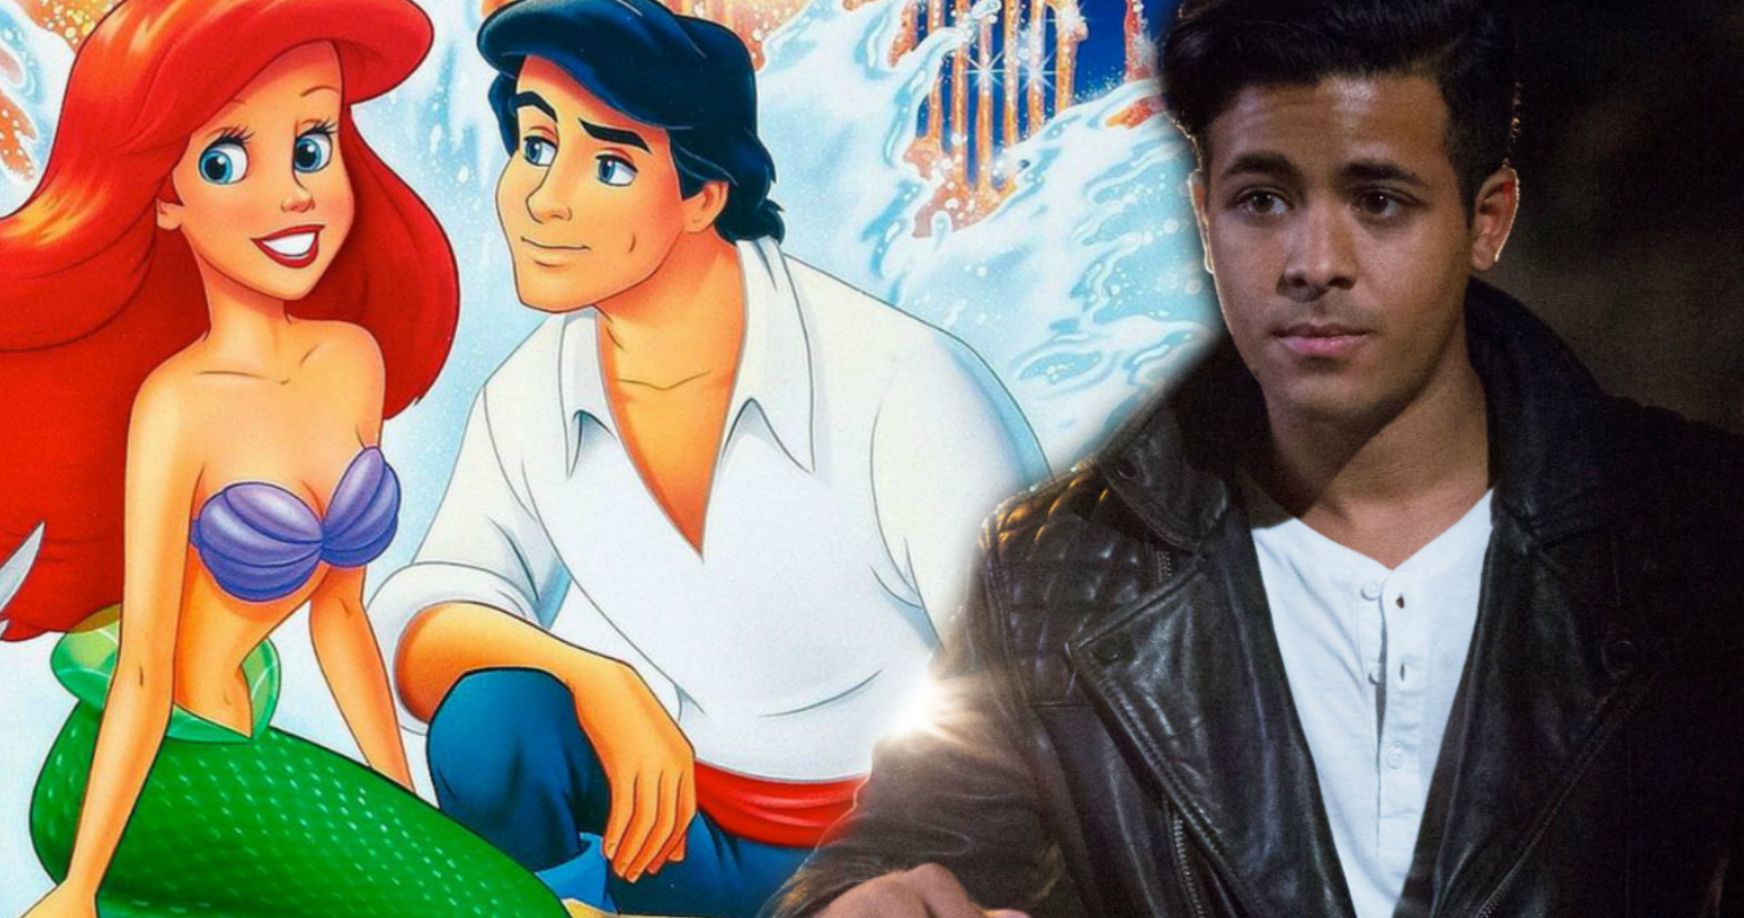 Disney's Little Mermaid Remake Auditions 13 Reasons Why Star for Prince Eric